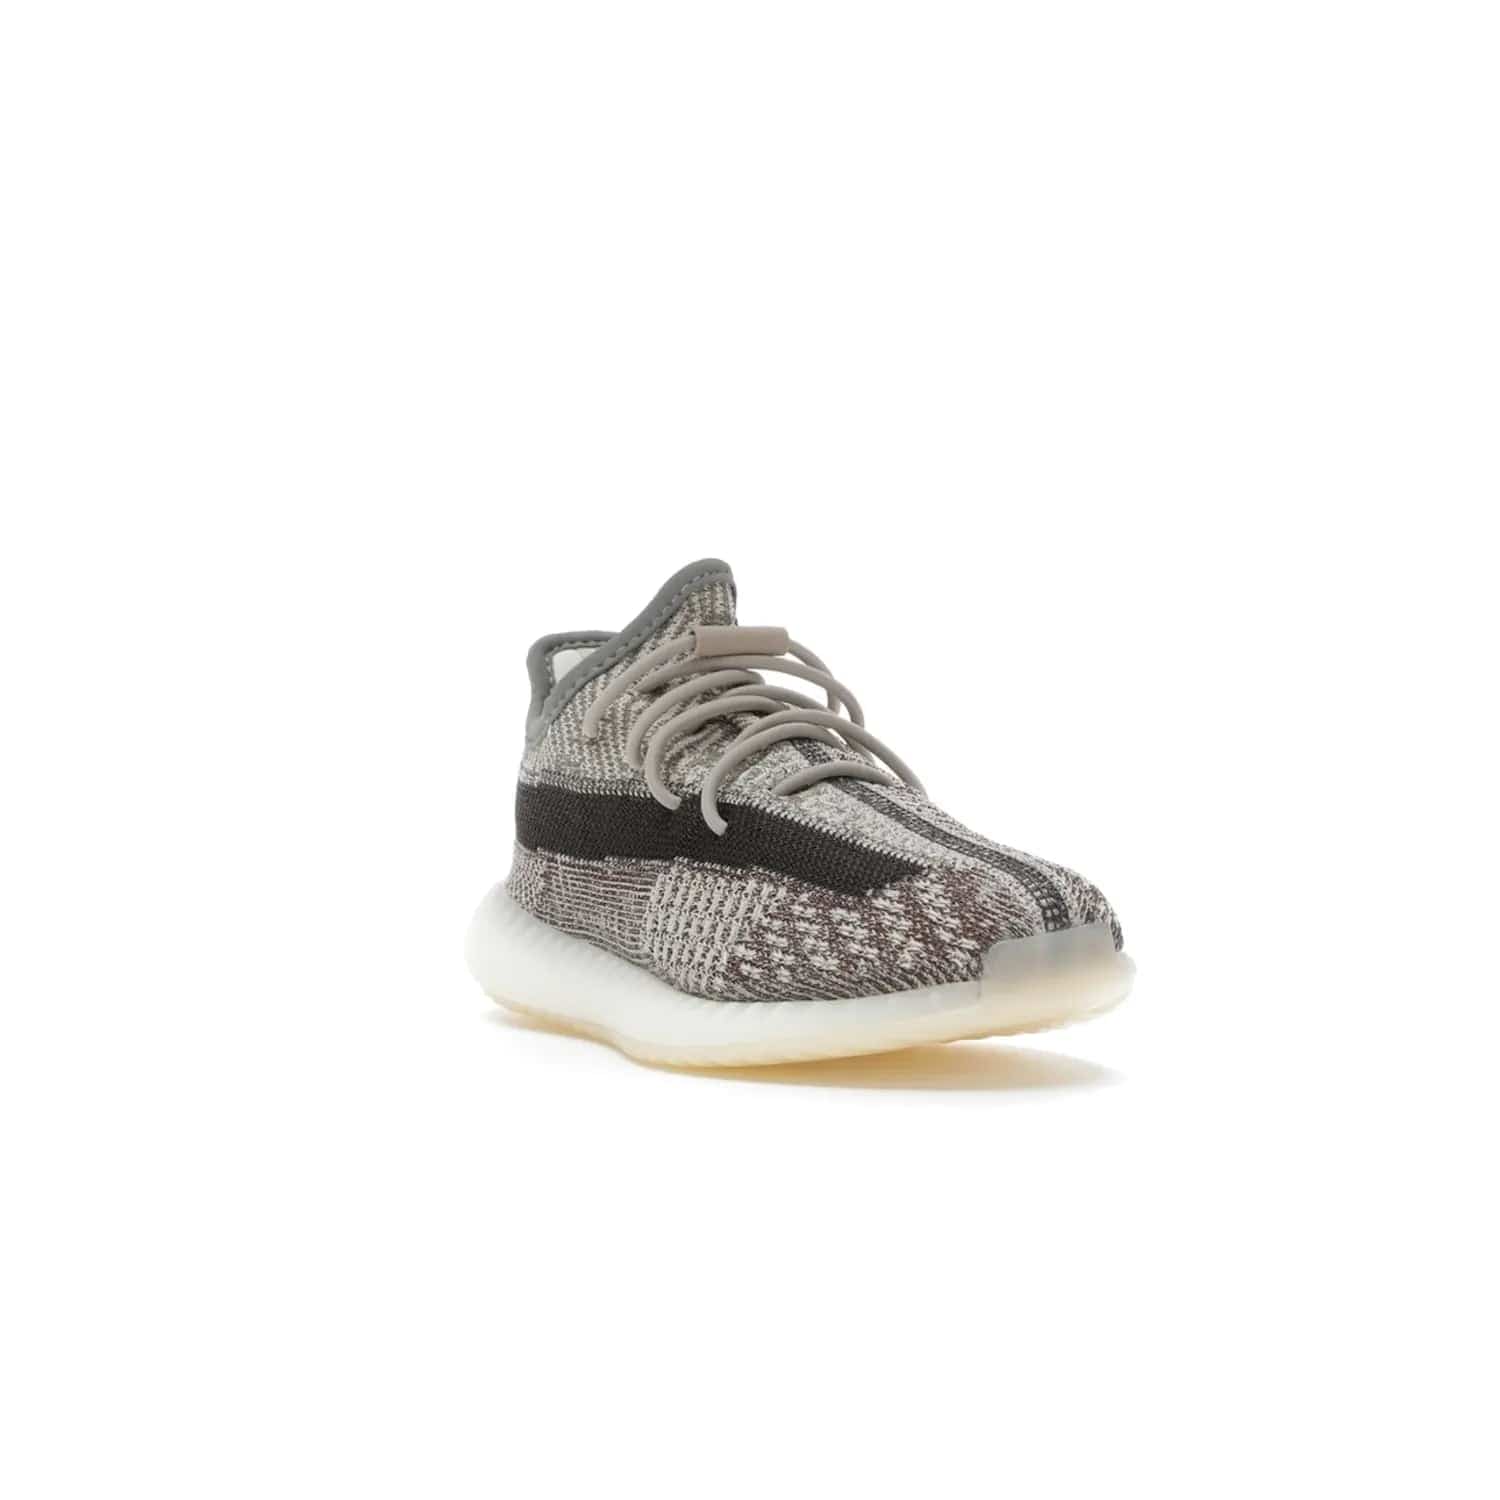 adidas Yeezy Boost 350 V2 Zyon (Kids) - Image 7 - Only at www.BallersClubKickz.com - The adidas Yeezy Boost 350 V2 Zyon (Kids) - perfect pick for fashion-savvy kids. Features soft Primeknit upper, lace closure & colorful patterning. Comfort & style for kids' summer outfits!